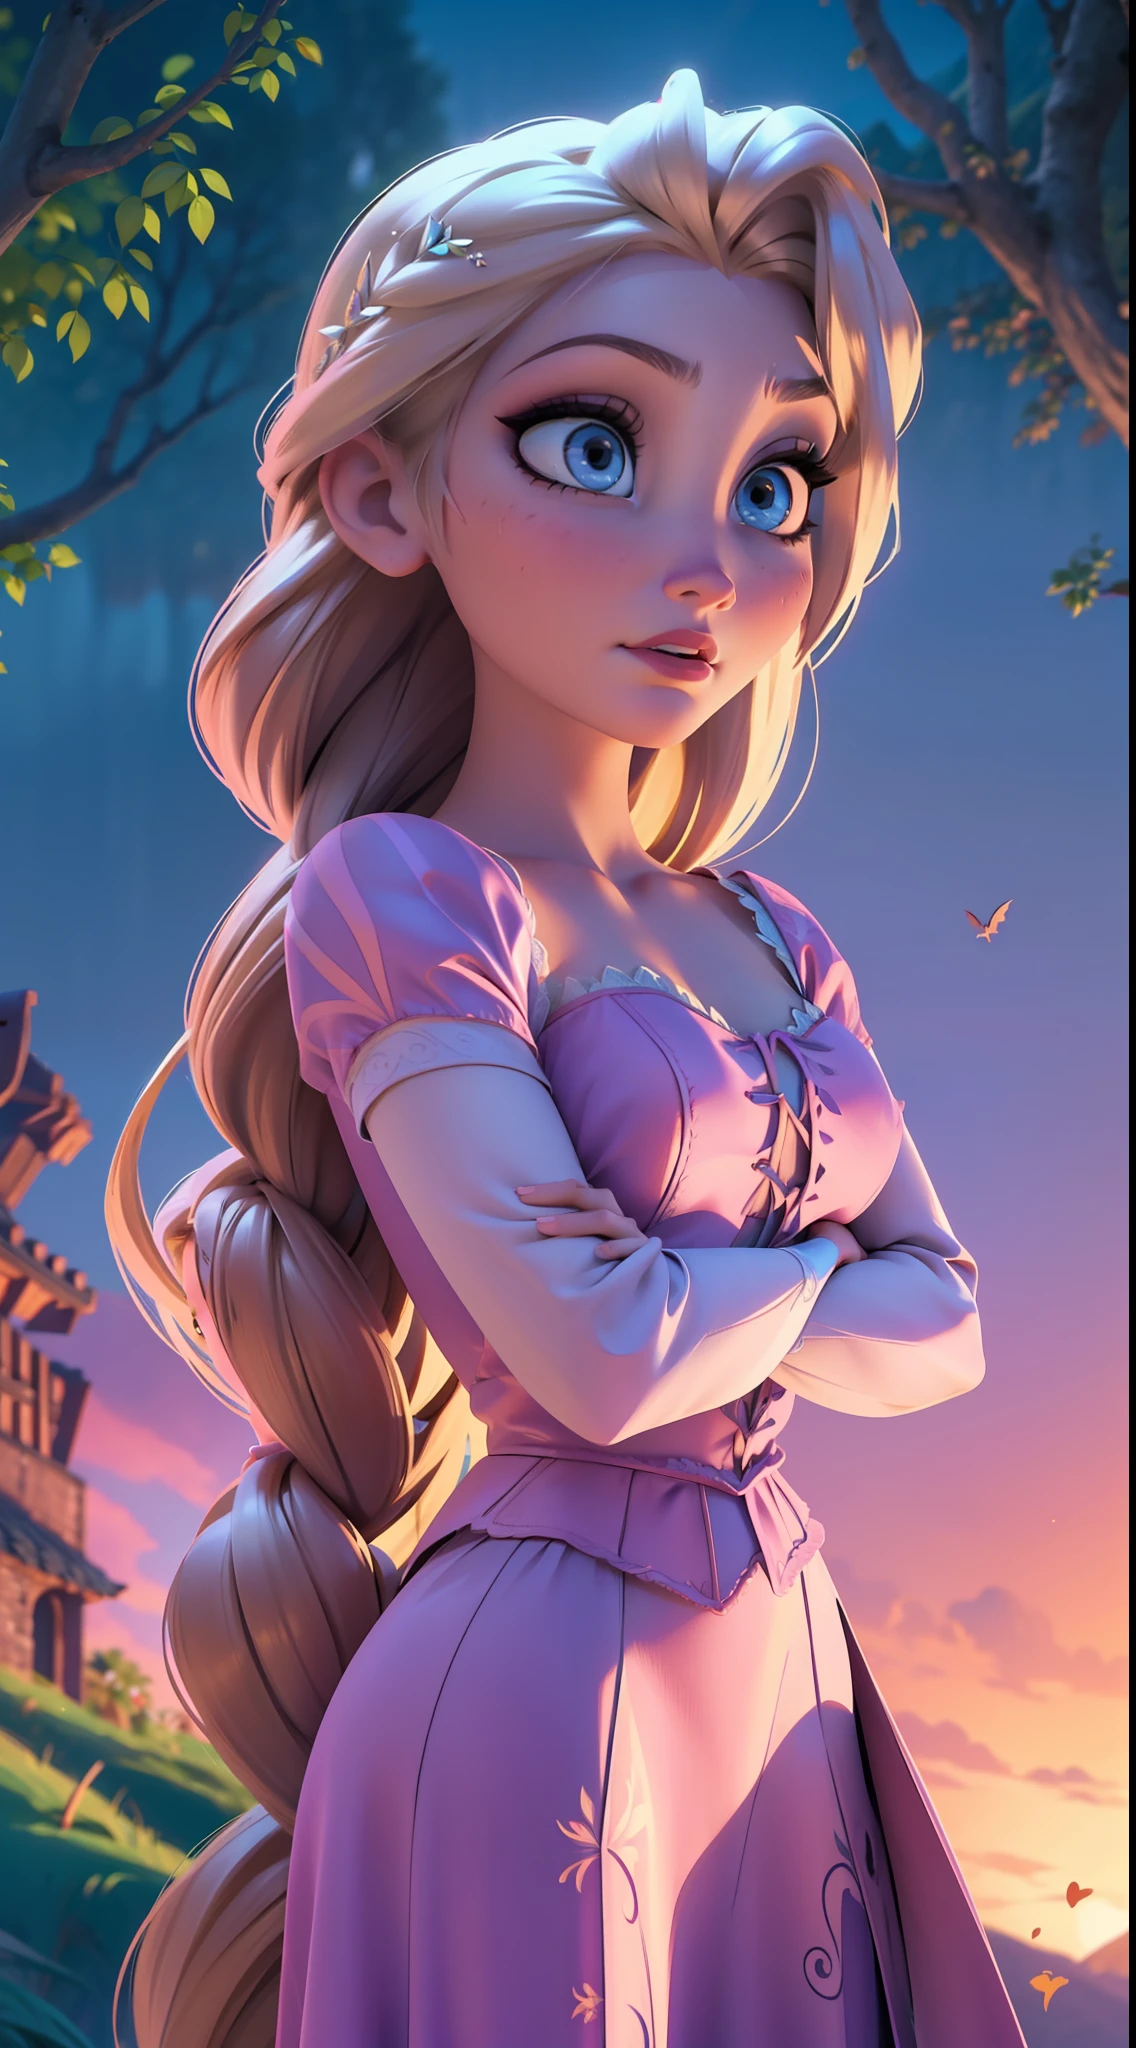 Elsa-Rapunzel Fusion, Merging models, Rapunzel&#39;s clothes, melting, 1girl, Beautiful, Character, Woman, Female, (master part:1.2), (best qualityer:1.2), (独奏:1.2), ((struggling pose)), ((field of battle)), cinemactic, perfects eyes, perfect  skin, perfect lighting, sorrido, Lumiere, Farbe, texturized skin, detail, Beauthfull, wonder wonder wonder wonder wonder wonder wonder wonder wonder wonder wonder wonder wonder wonder wonder wonder wonder wonder wonder wonder wonder wonder wonder wonder wonder wonder wonder wonder wonder wonder wonder wonder, ultra detali, face perfect